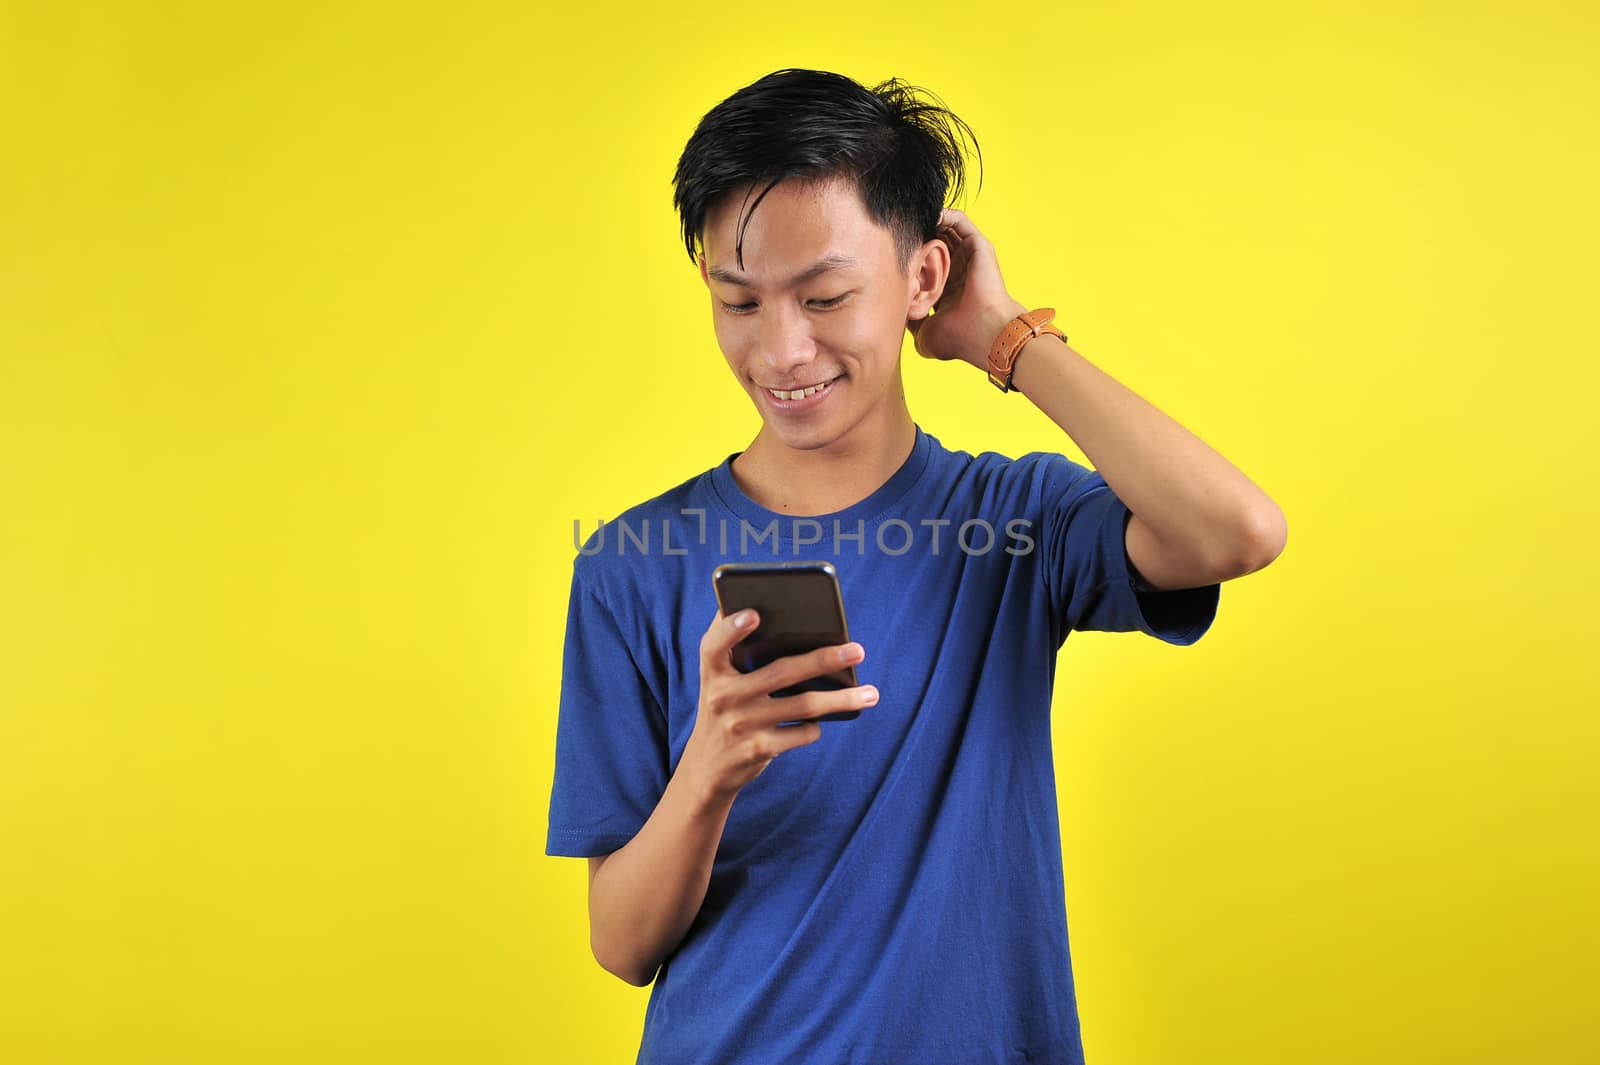 Happy of young good looking Asian man smiling using smartphone isolated on yellow background